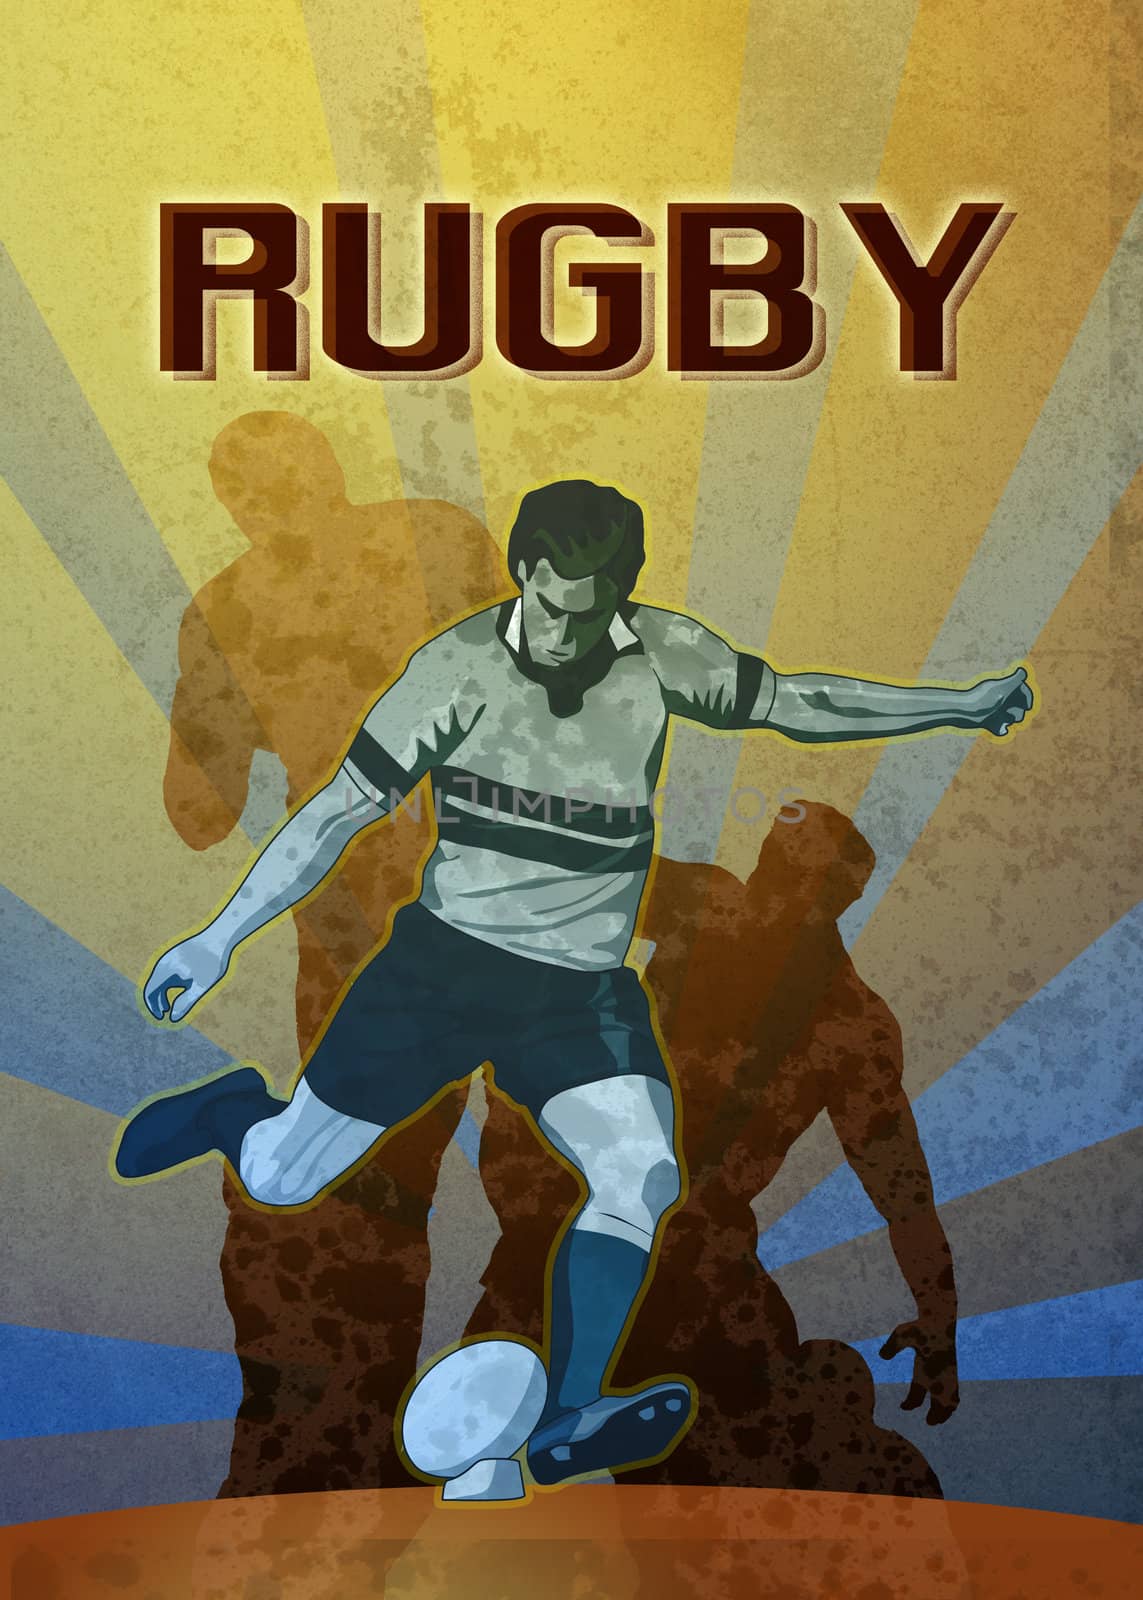 rugby player kicking the ball poster by patrimonio